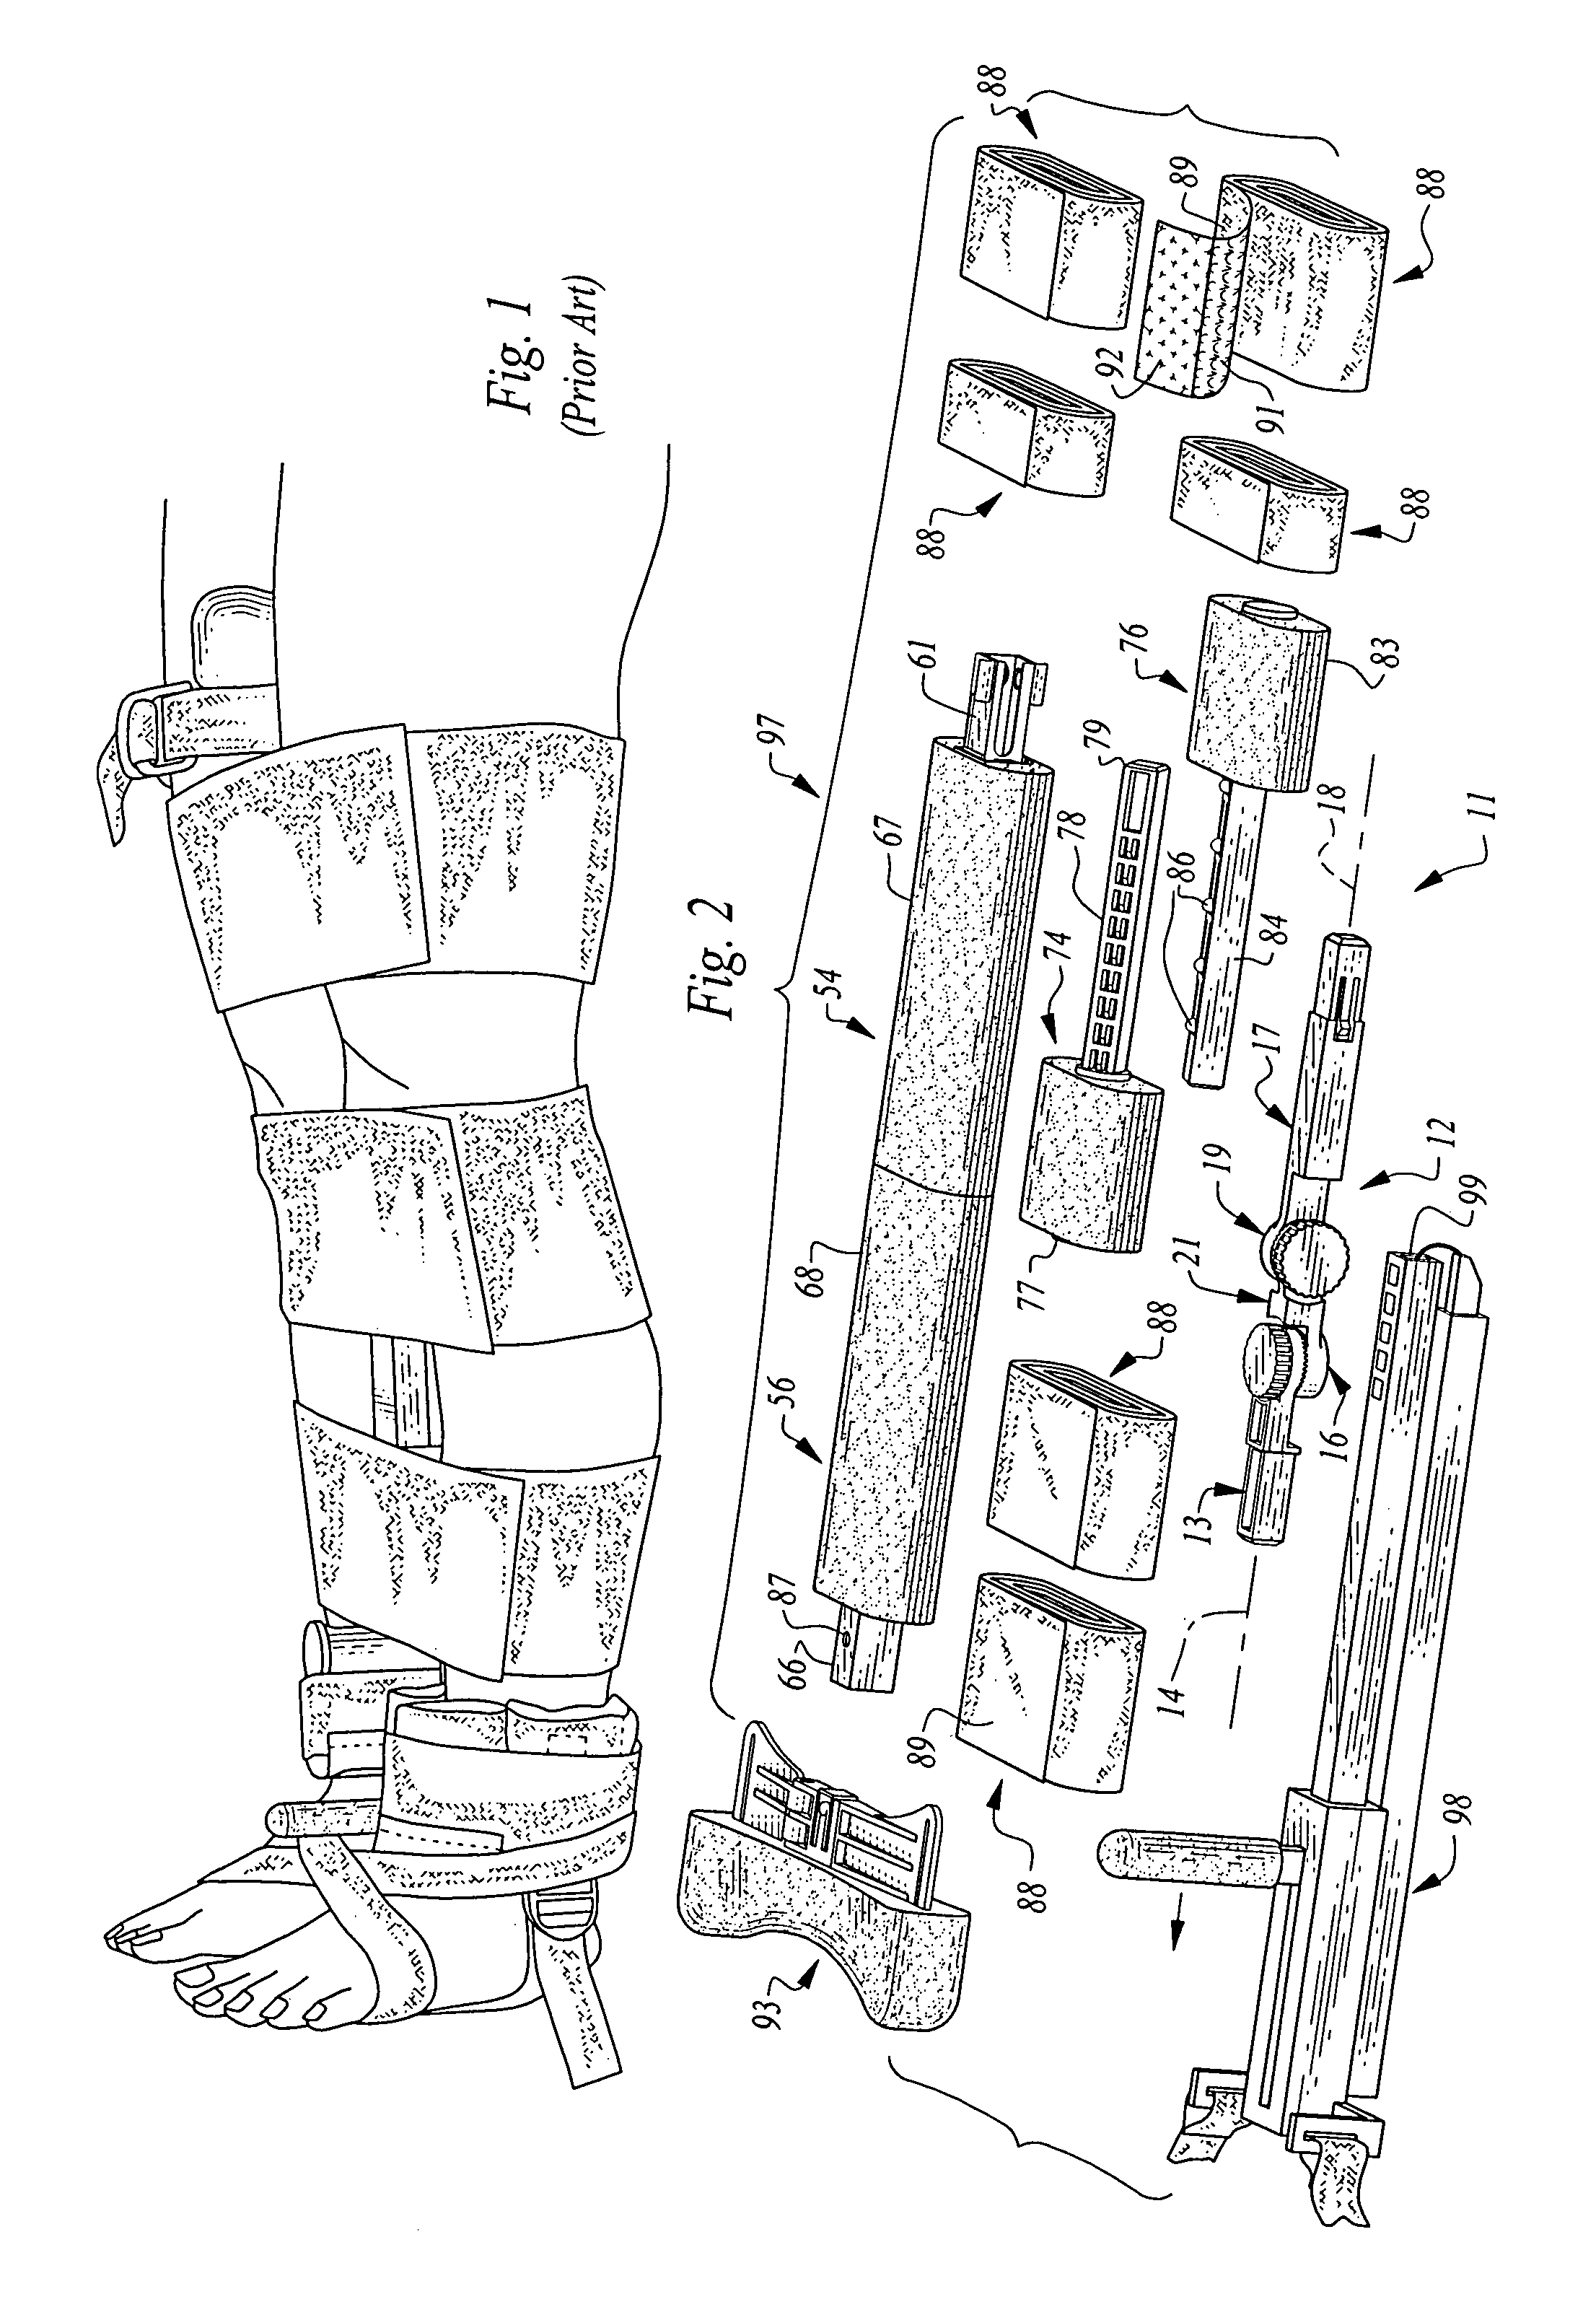 Medical splinting apparatus and methods for using the same